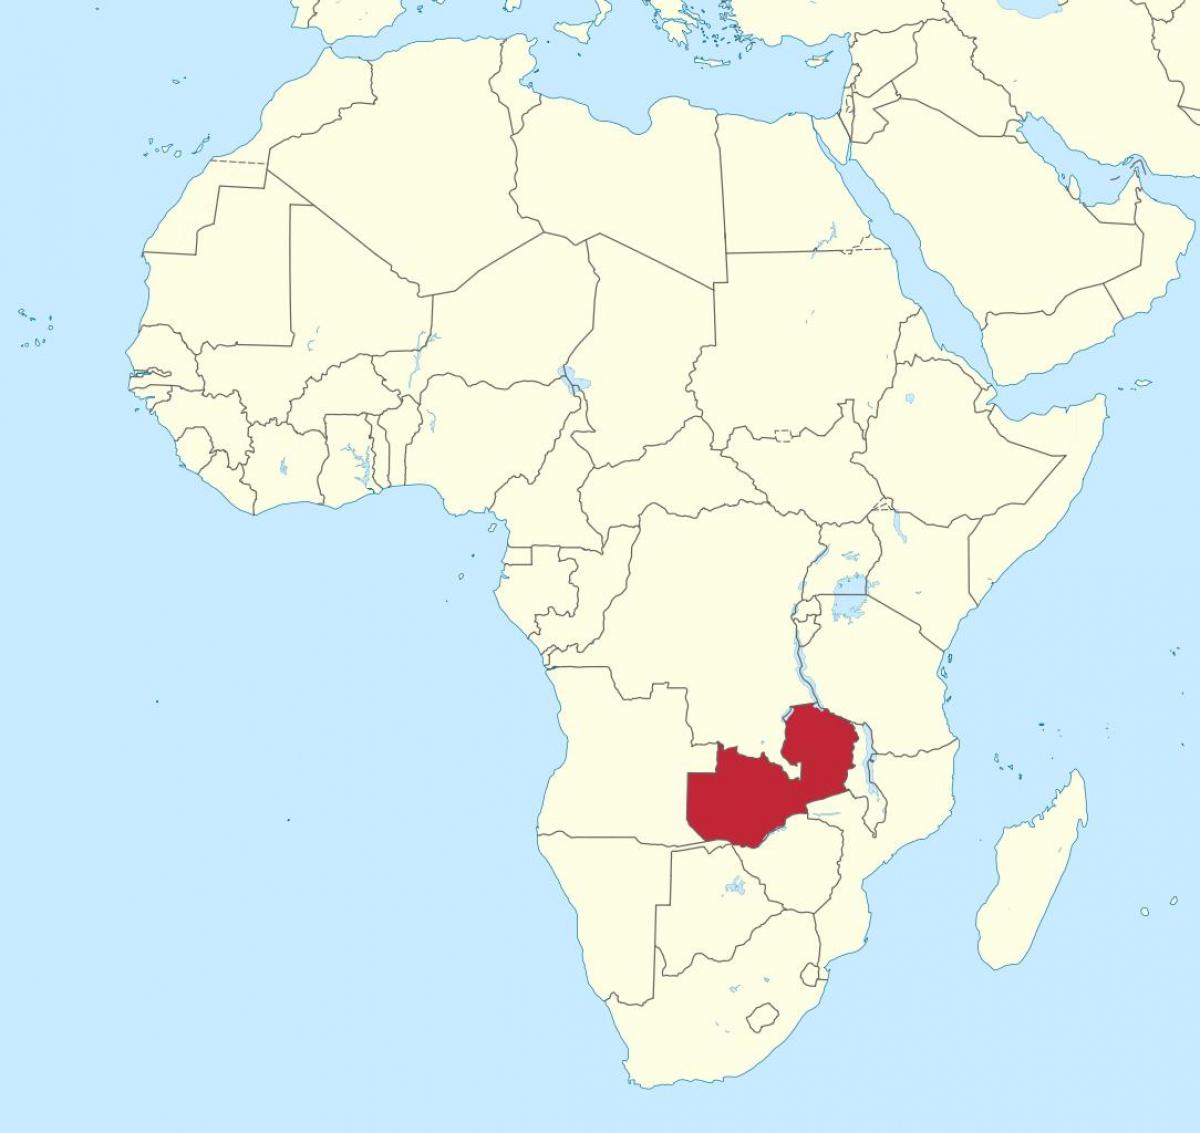 map of africa showing Zambia